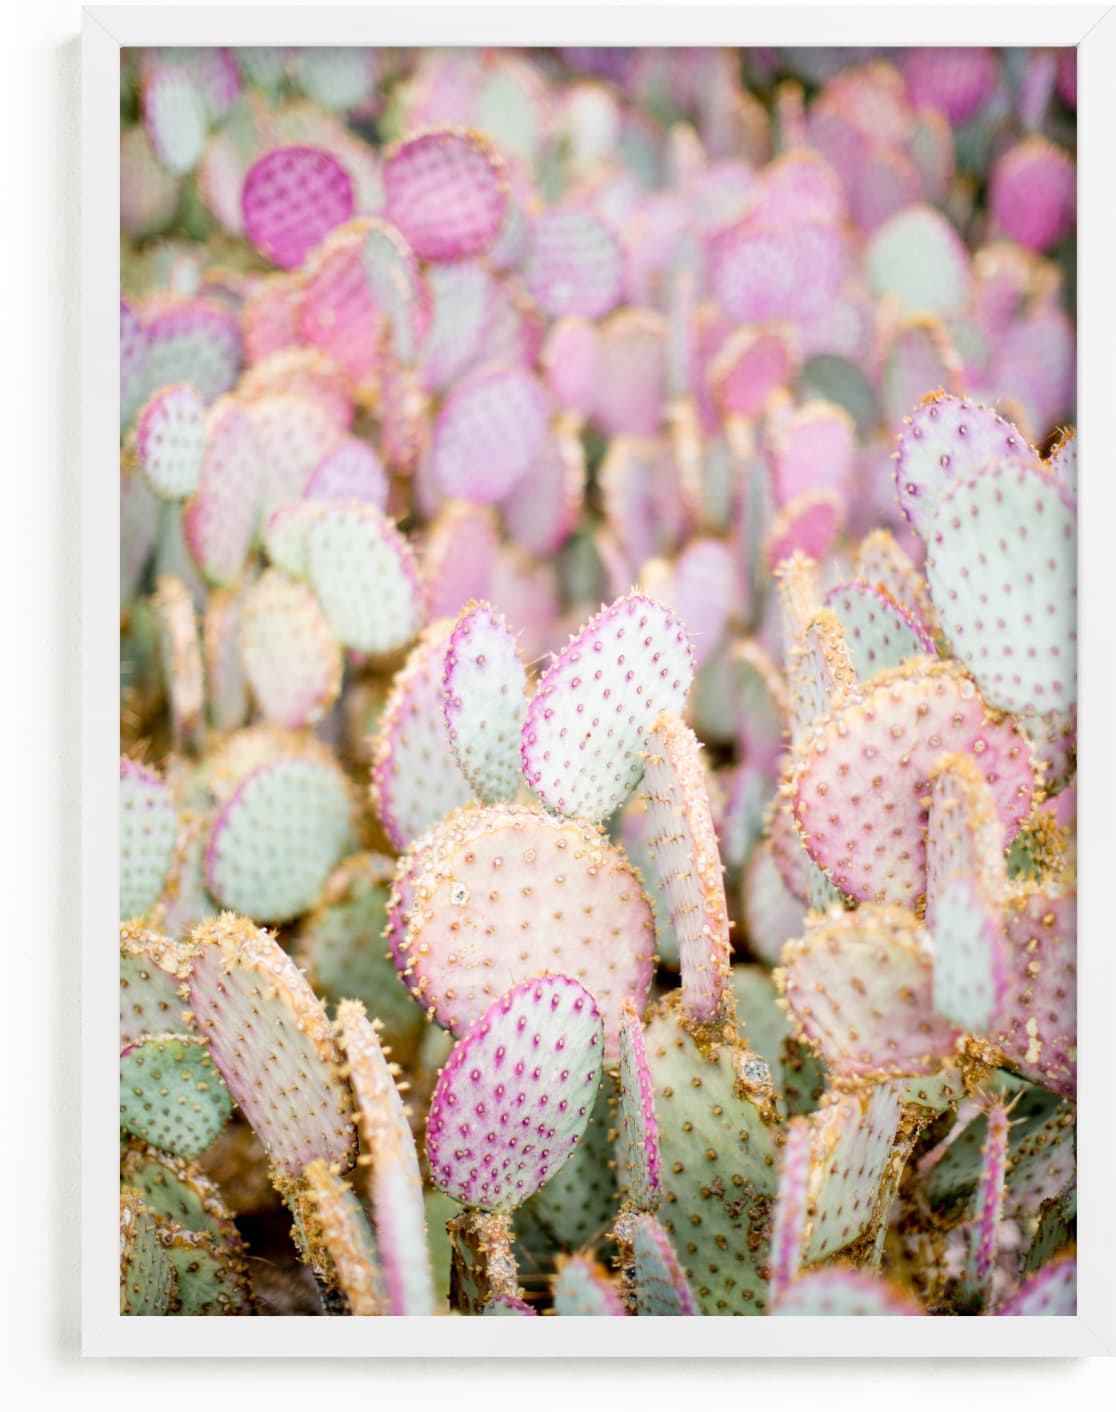 This is a purple art by Shannon Kirsten called PINK CACTI.